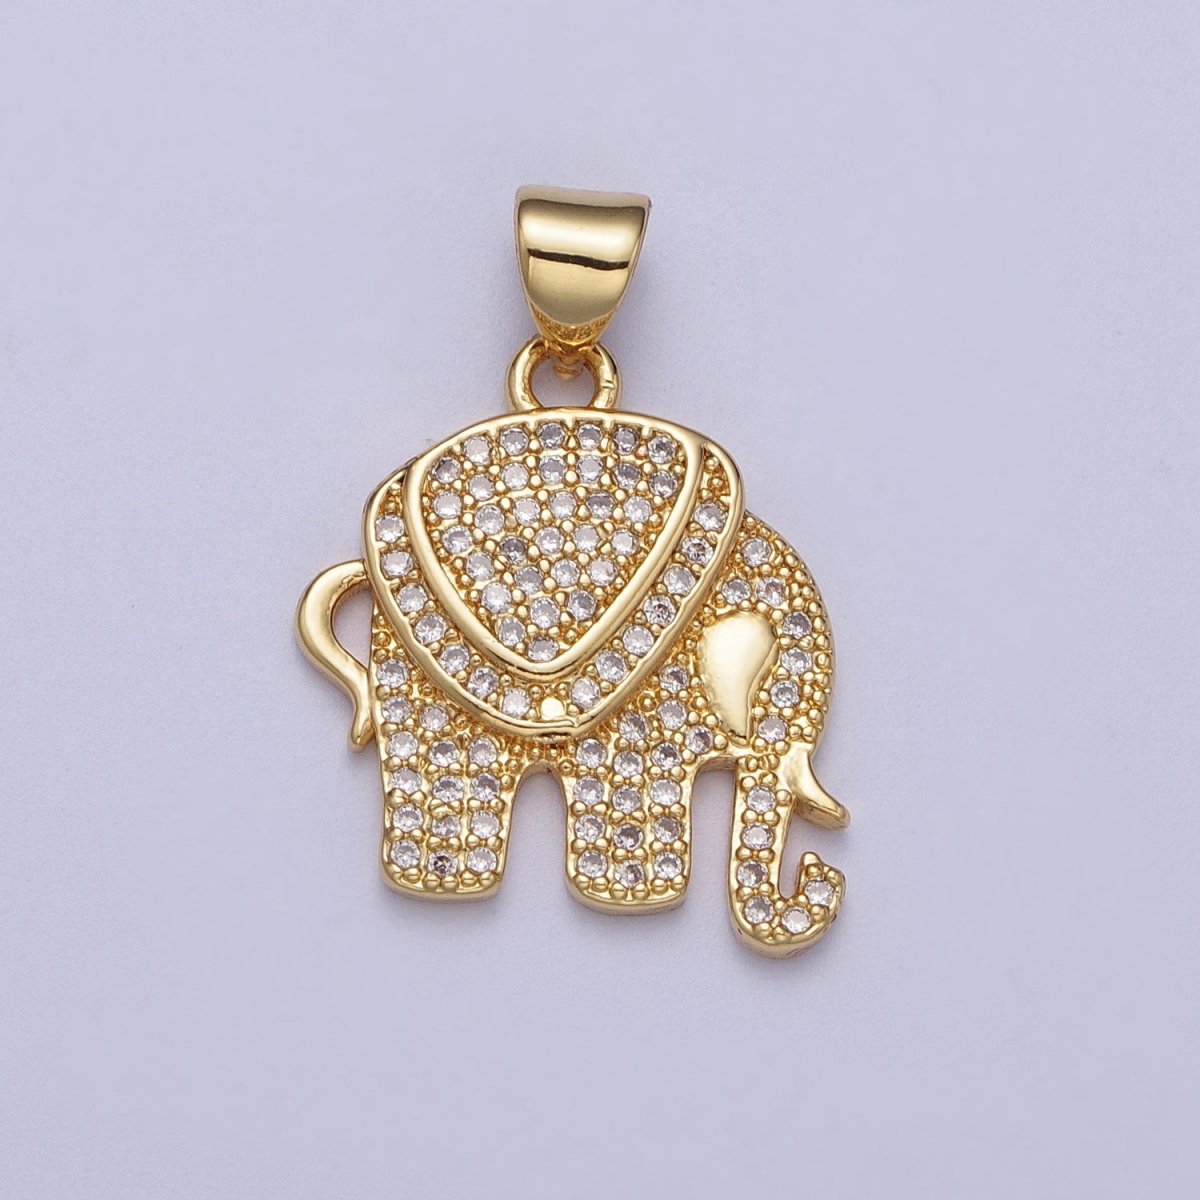 Clear Micro Paved CZ Gold Wildlife Elephant Pendant For Safari Nature Jewelry Making H-752 - DLUXCA